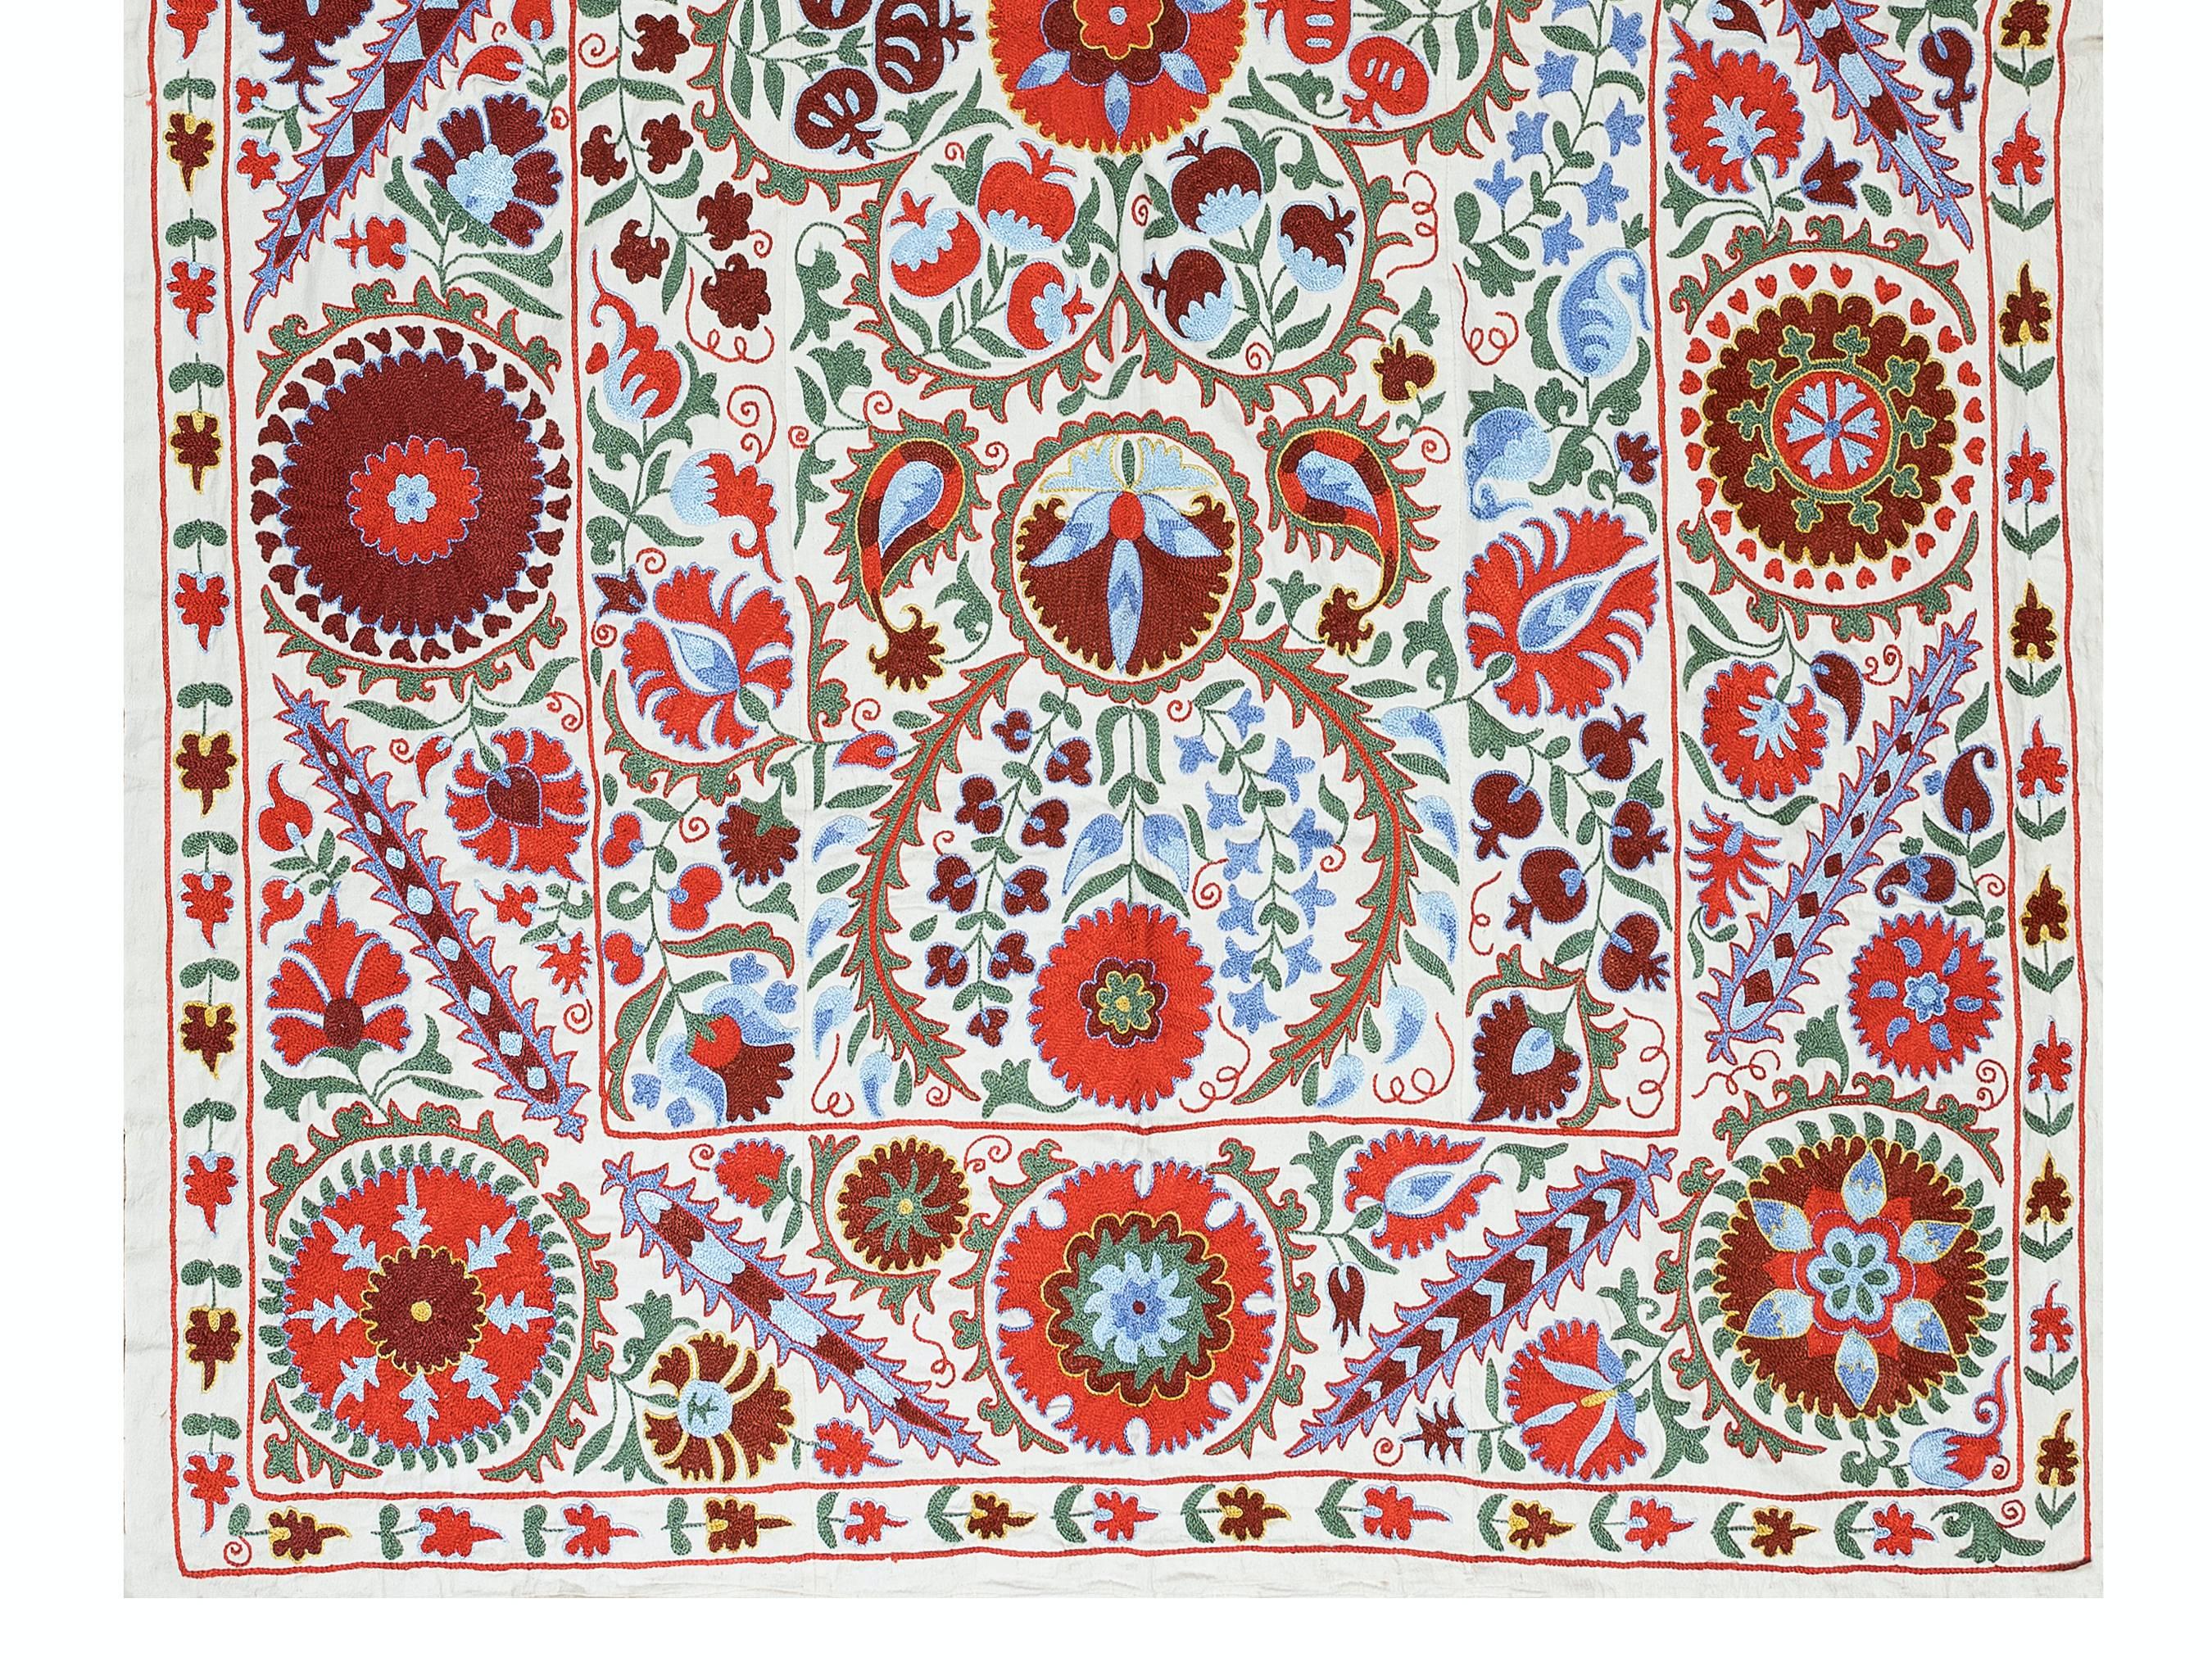 Uzbek 4.7x6.9 Ft Hand Embroidered Suzani Bed Cover, New Traditional Silk Wall Hanging For Sale